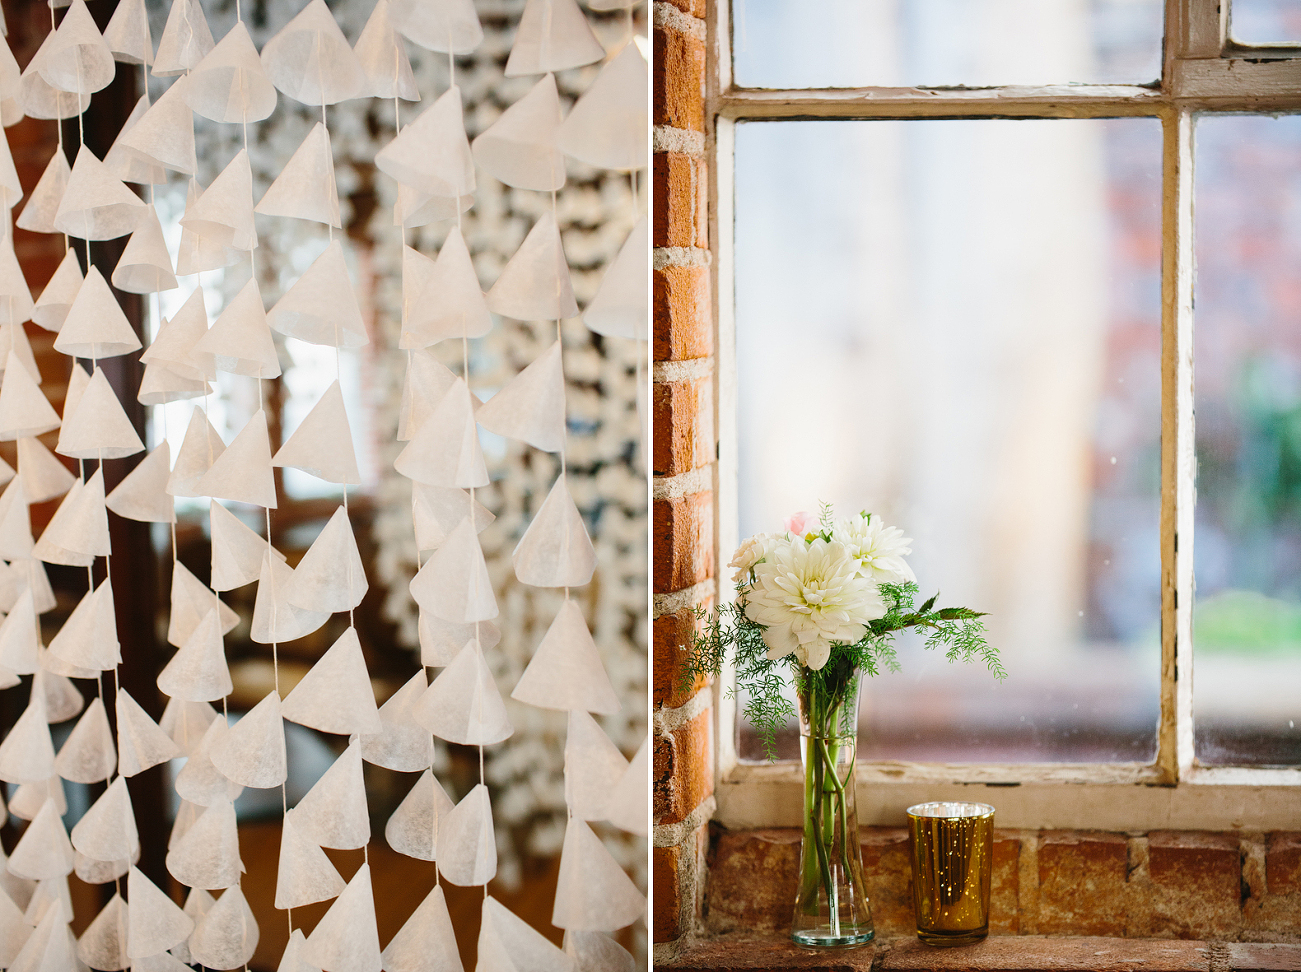 These are some detail photos from Alannah and Evan